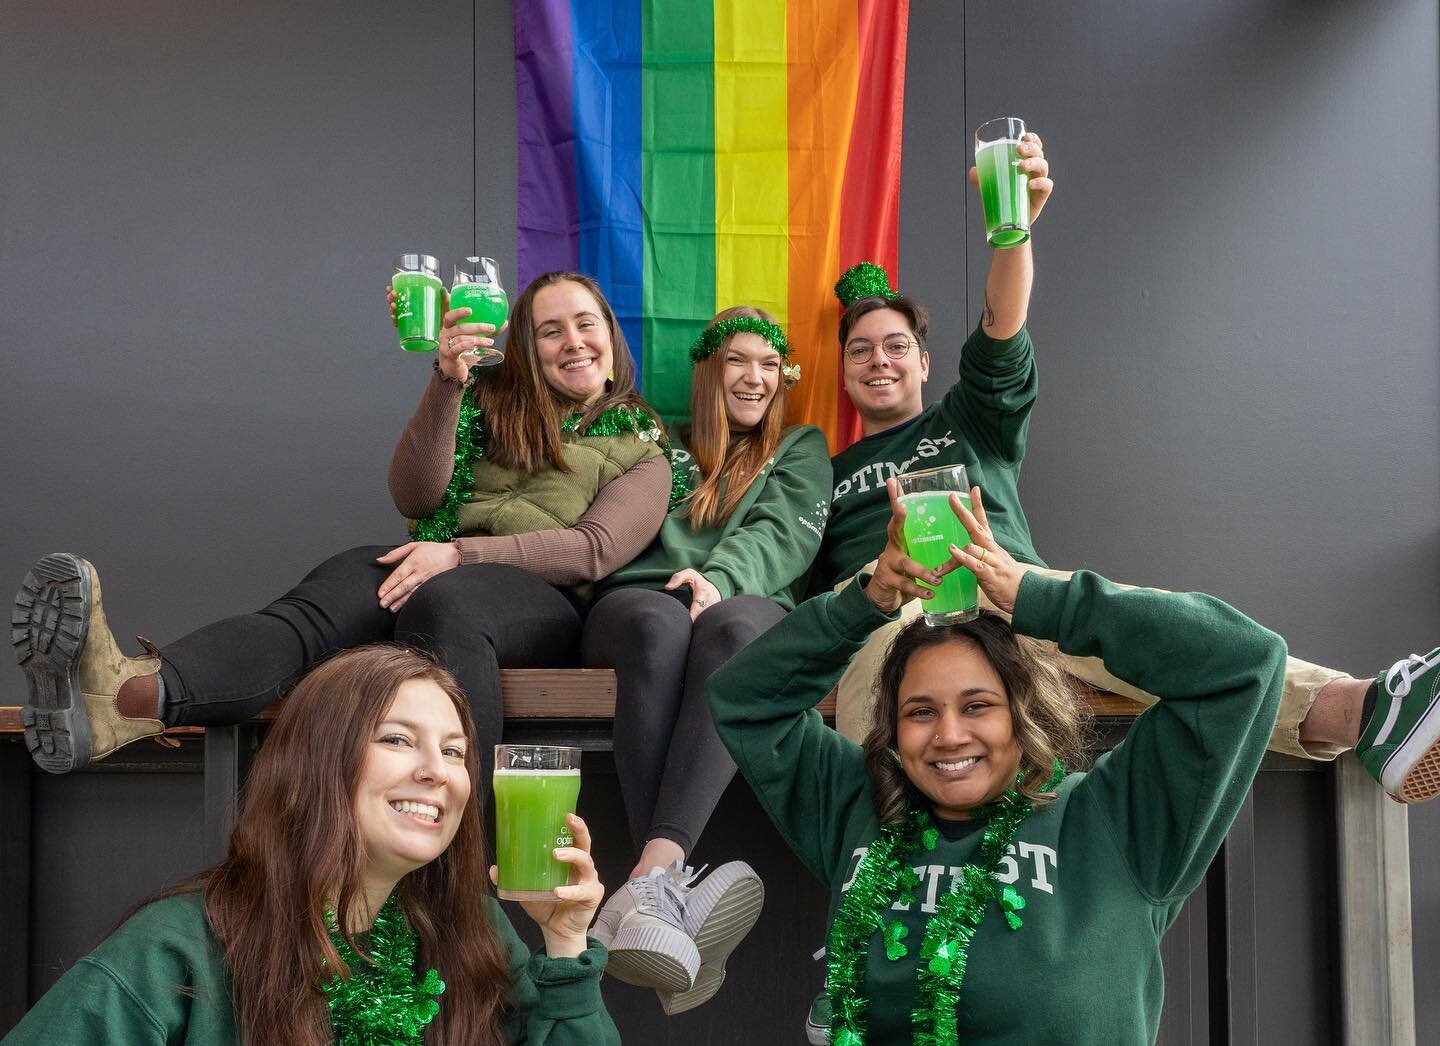 We&rsquo;re getting hyped for our first big St. Patrick&rsquo;s Day celebration in years 🍀 

Join us on Friday, 3/17. We&rsquo;ll be pulling out all the stops with limited-edition green beverages available all day long! SL&Aacute;INTES! 🍻💚⭐️